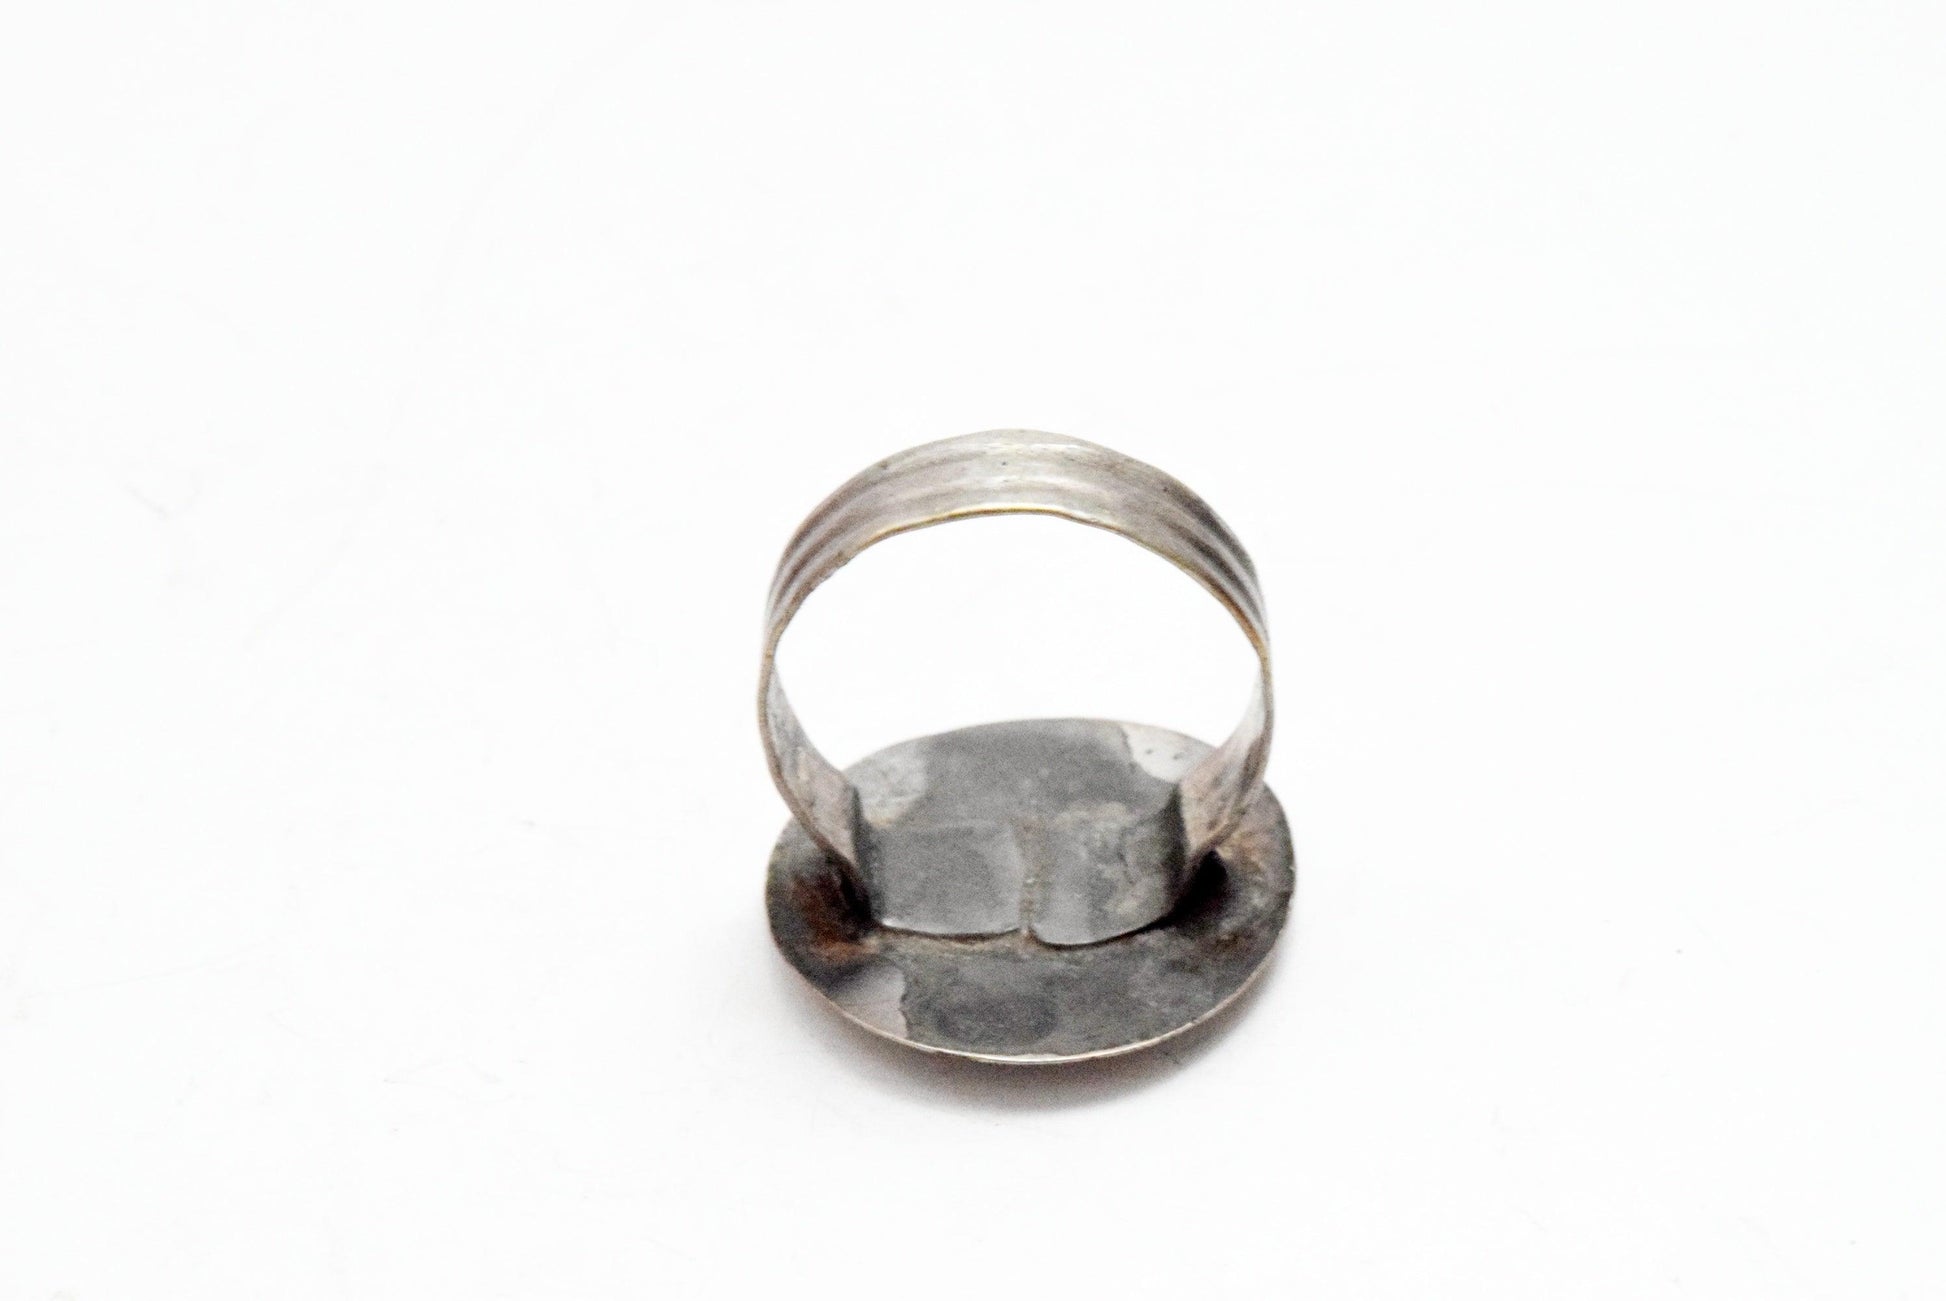 Vintage Silver Flower Ring from Morocco - Anteeka